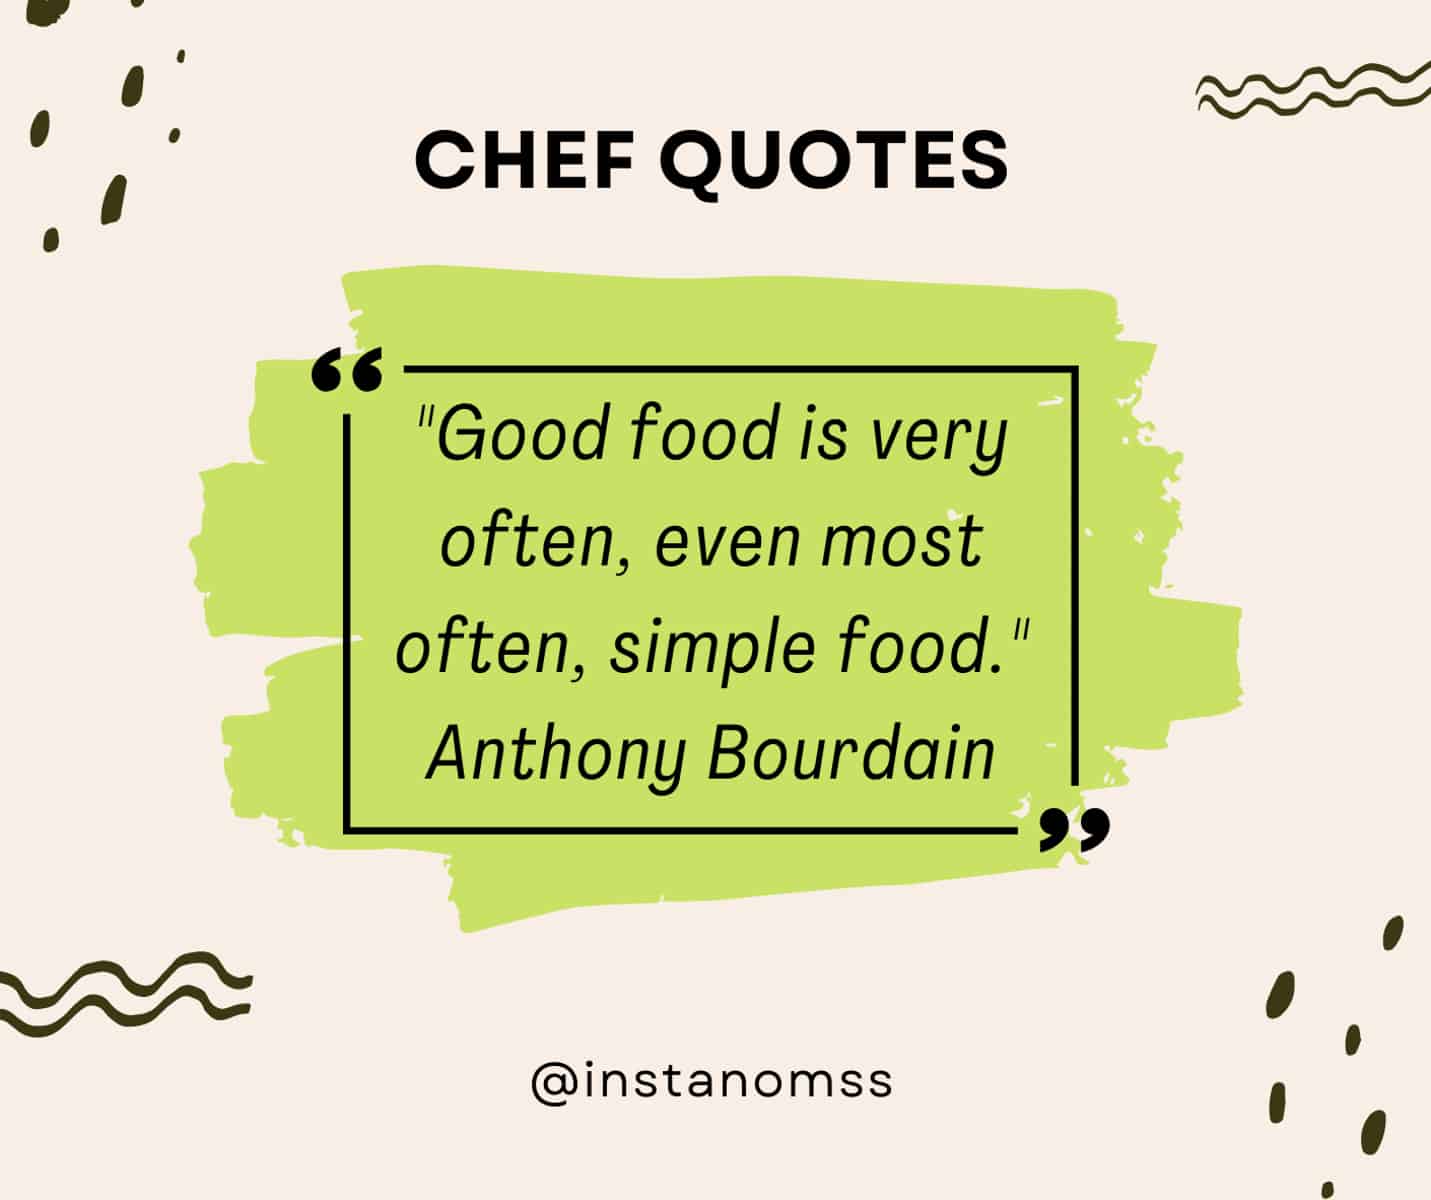 "Good food is very often, even most often, simple food." Anthony Bourdain